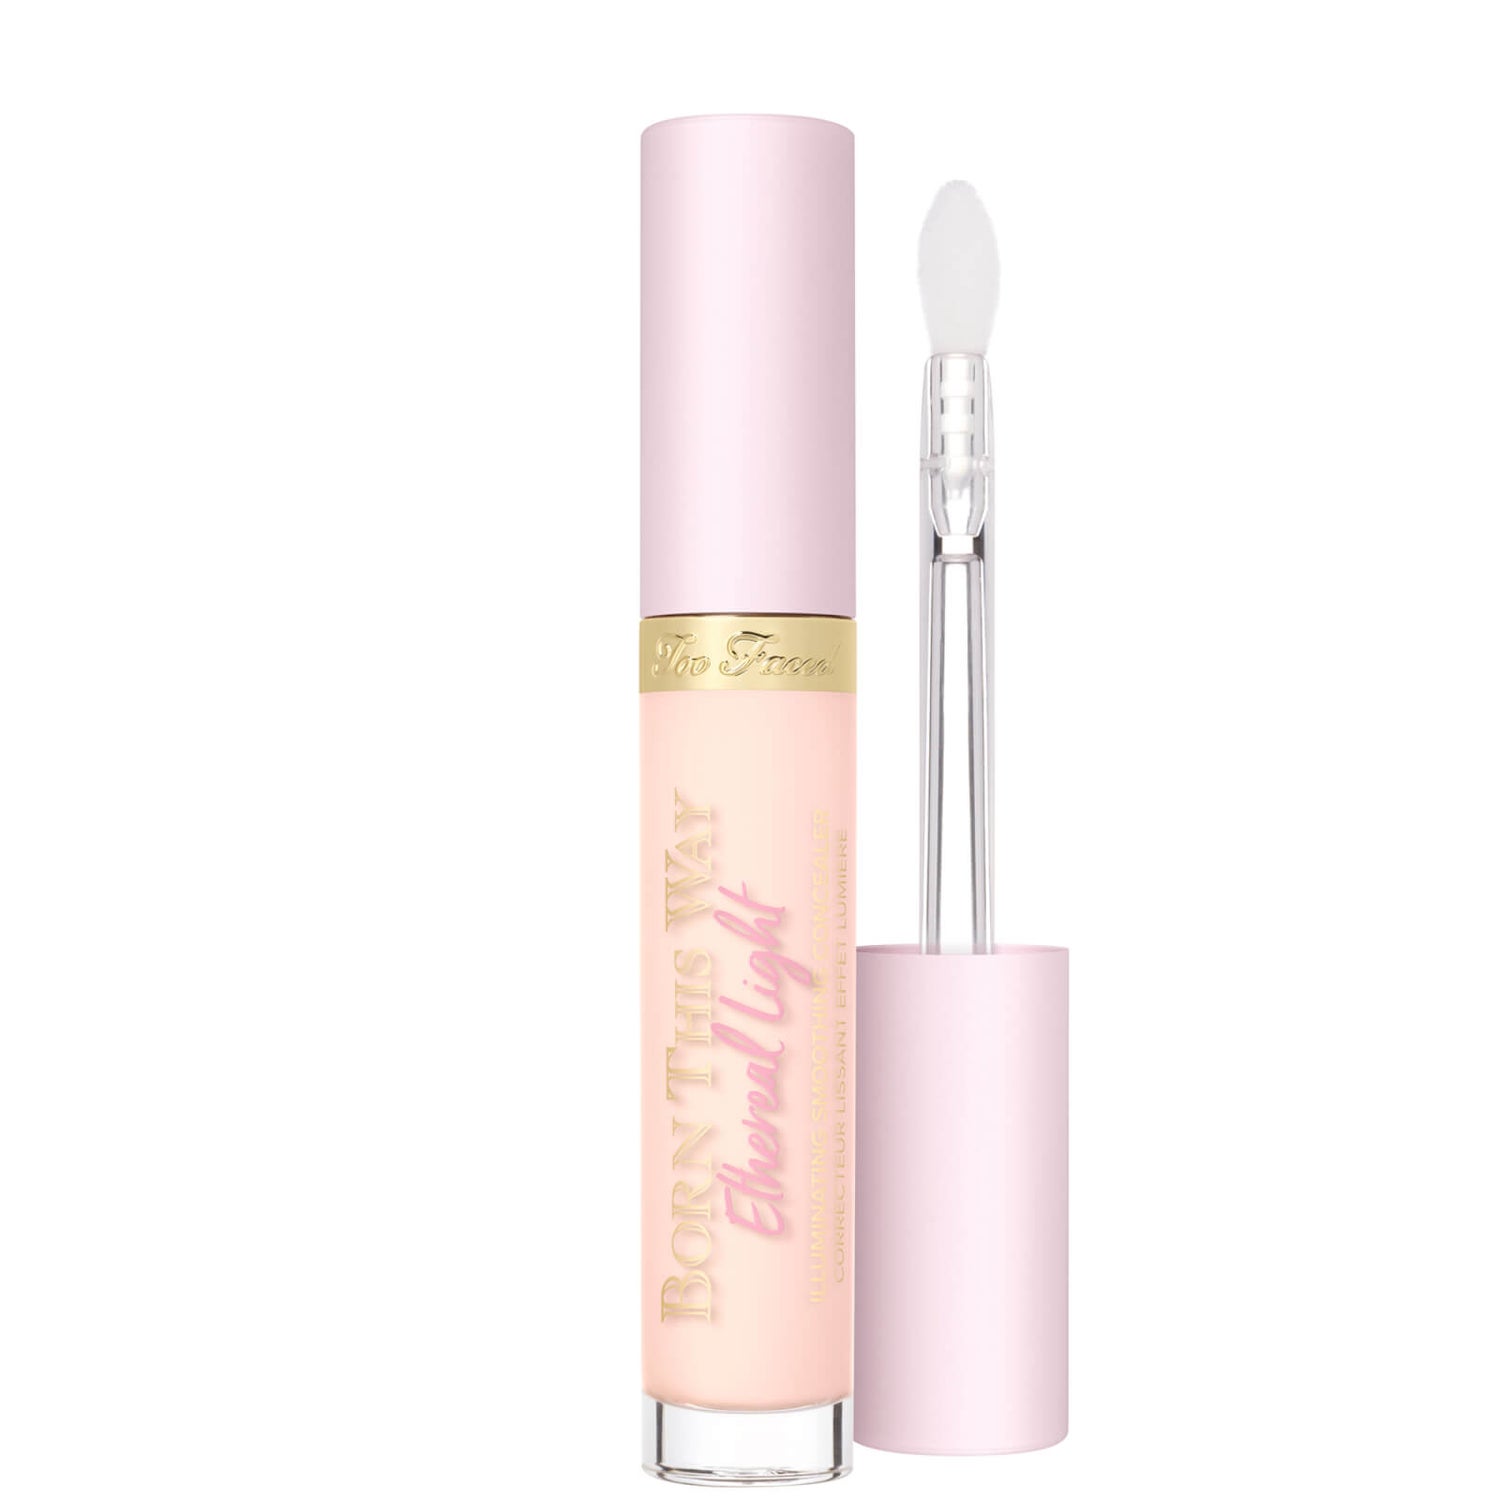 Too Faced Born This Way Ethereal Light Illuminating Smoothing Concealer 5ml (Various Shades)